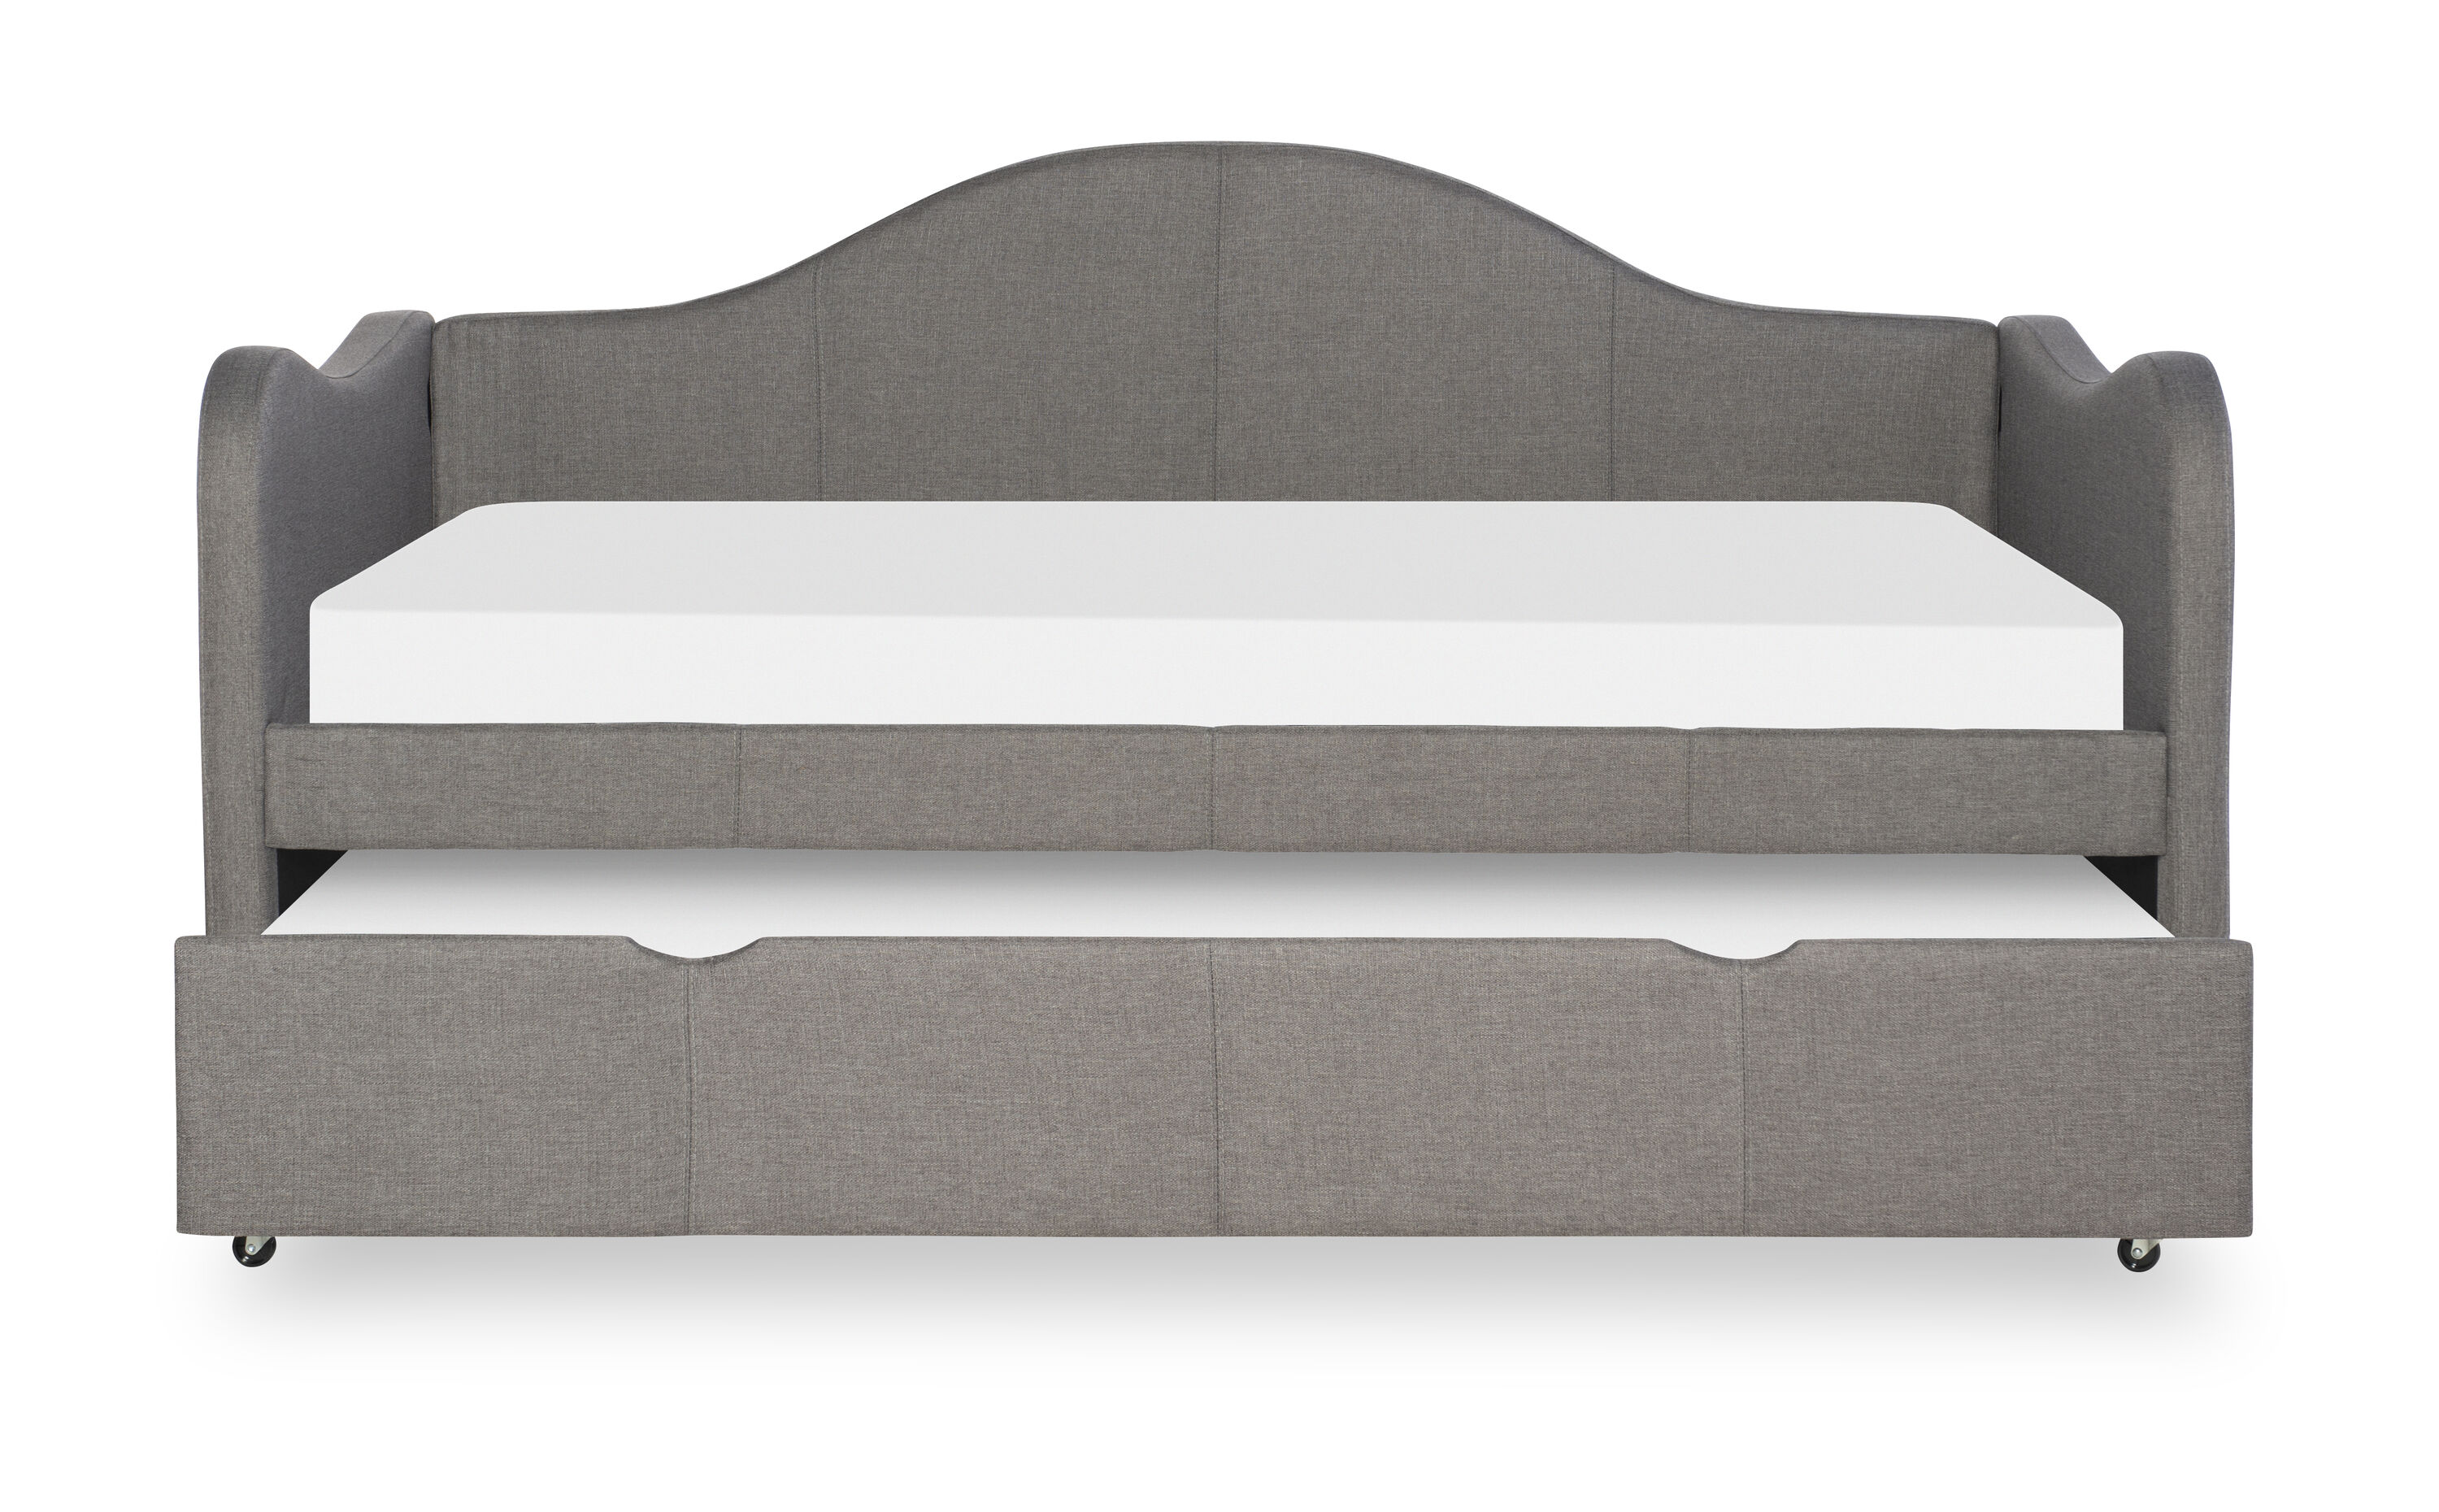 Powell Gray Upholstered Daybed with Trundle Bed Frame at Lowes.com